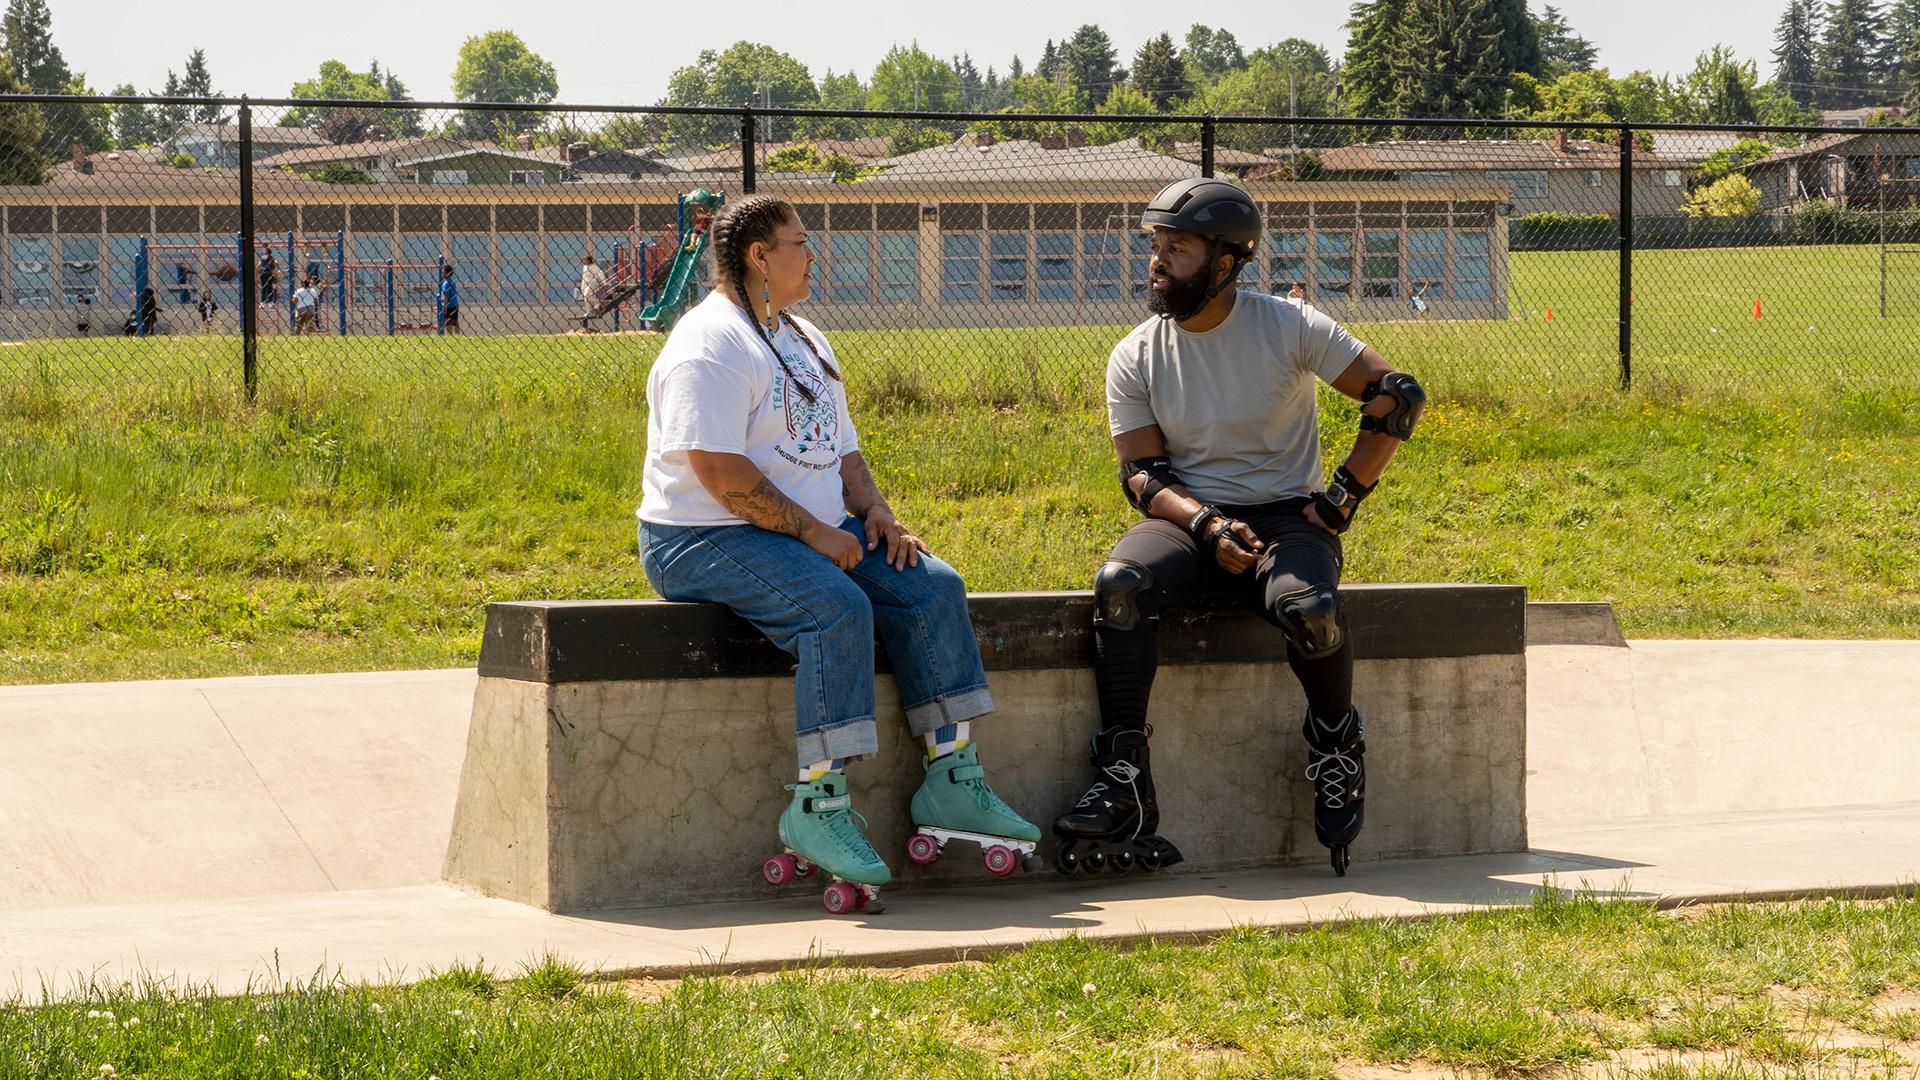 Two people sitting on a platform in roller skates